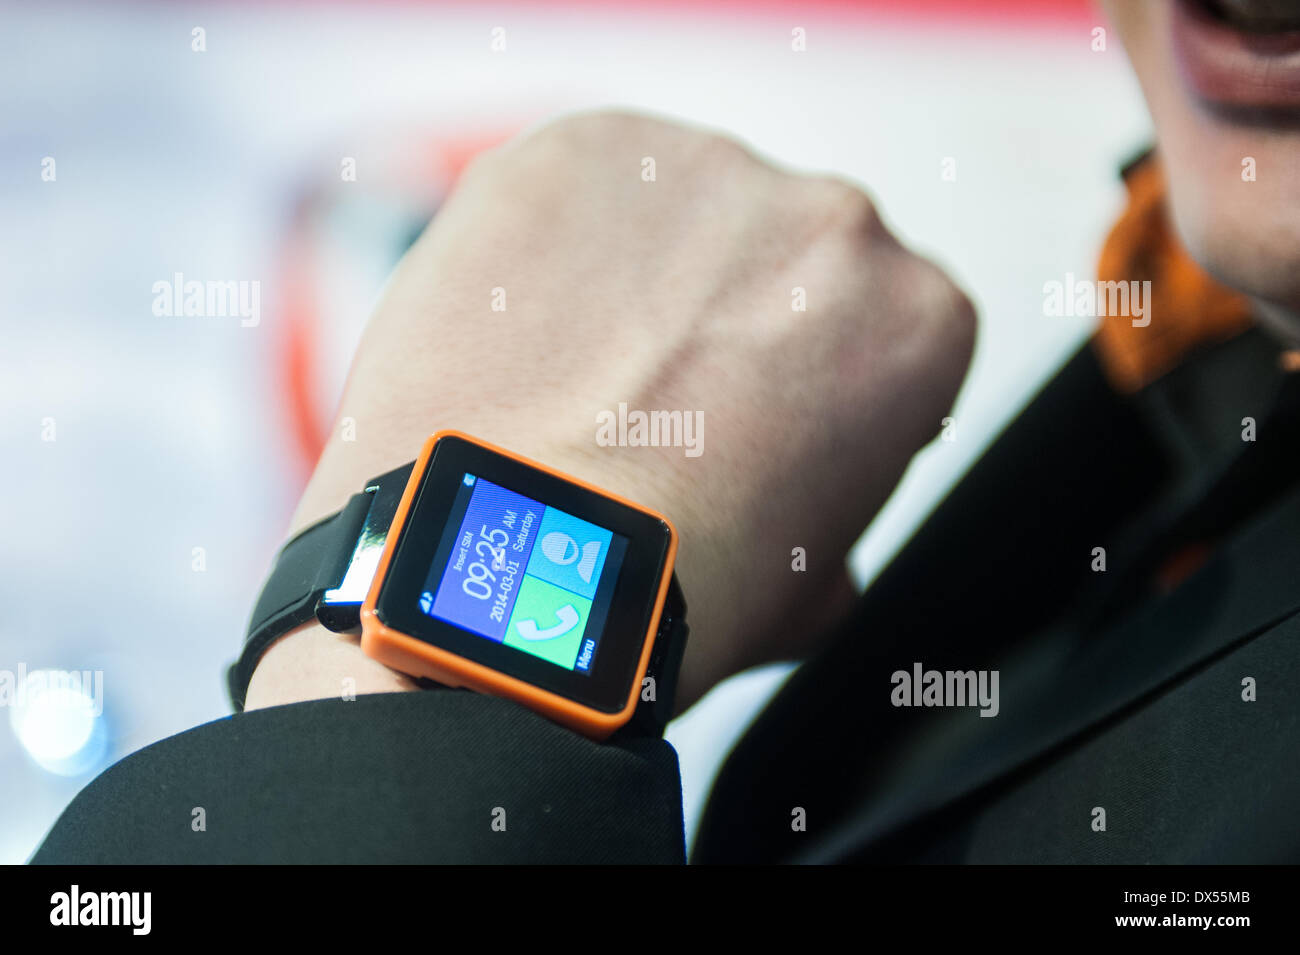 London, UK. 18 March 2014. A man wears a Burg smart watch at the Wearable Technology Conference at Olympia in London Credit:  Piero Cruciatti/Alamy Live News Stock Photo